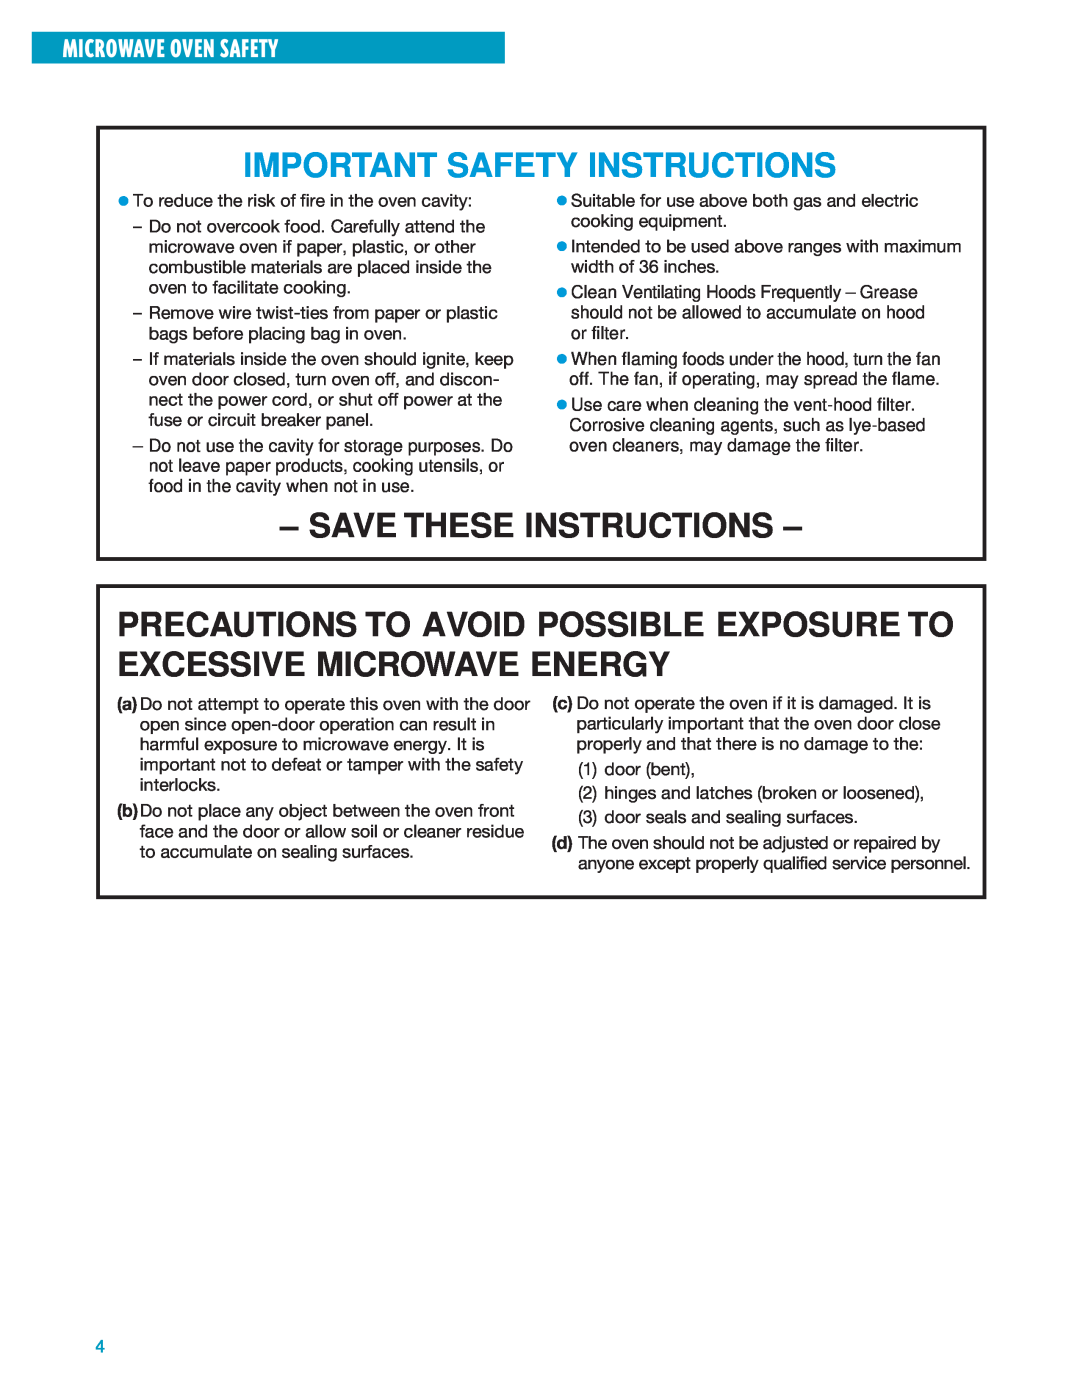 Whirlpool YMH7140XF Precautions To Avoid Possible Exposure To Excessive Microwave Energy, Microwave Oven Safety 